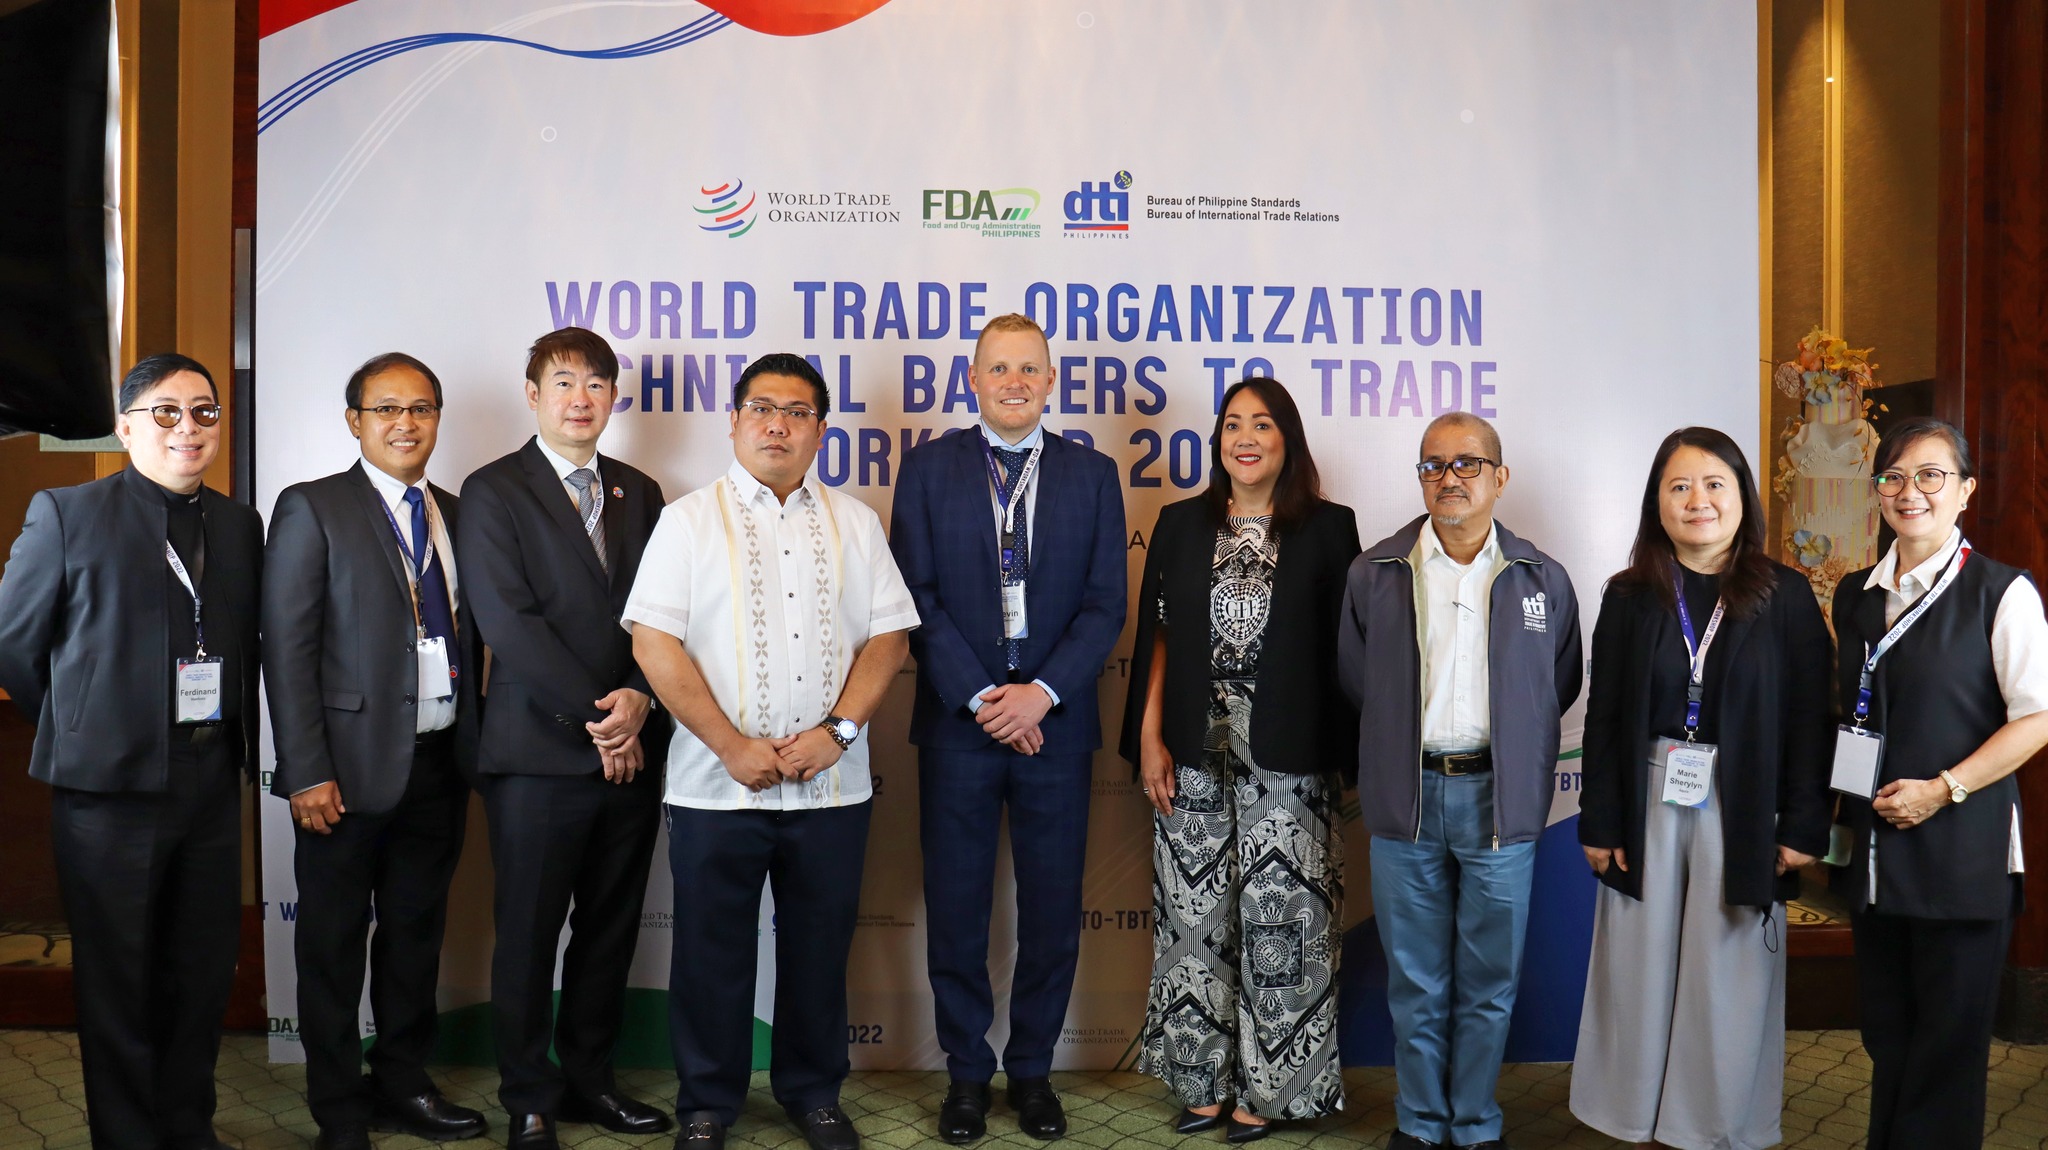 Featured Activity || The Food and Drug Administration (FDA) participated in the three-day World Trade Organization-Technical Barriers to Trade (WTO-TBT) National Workshop on 13-15 September.